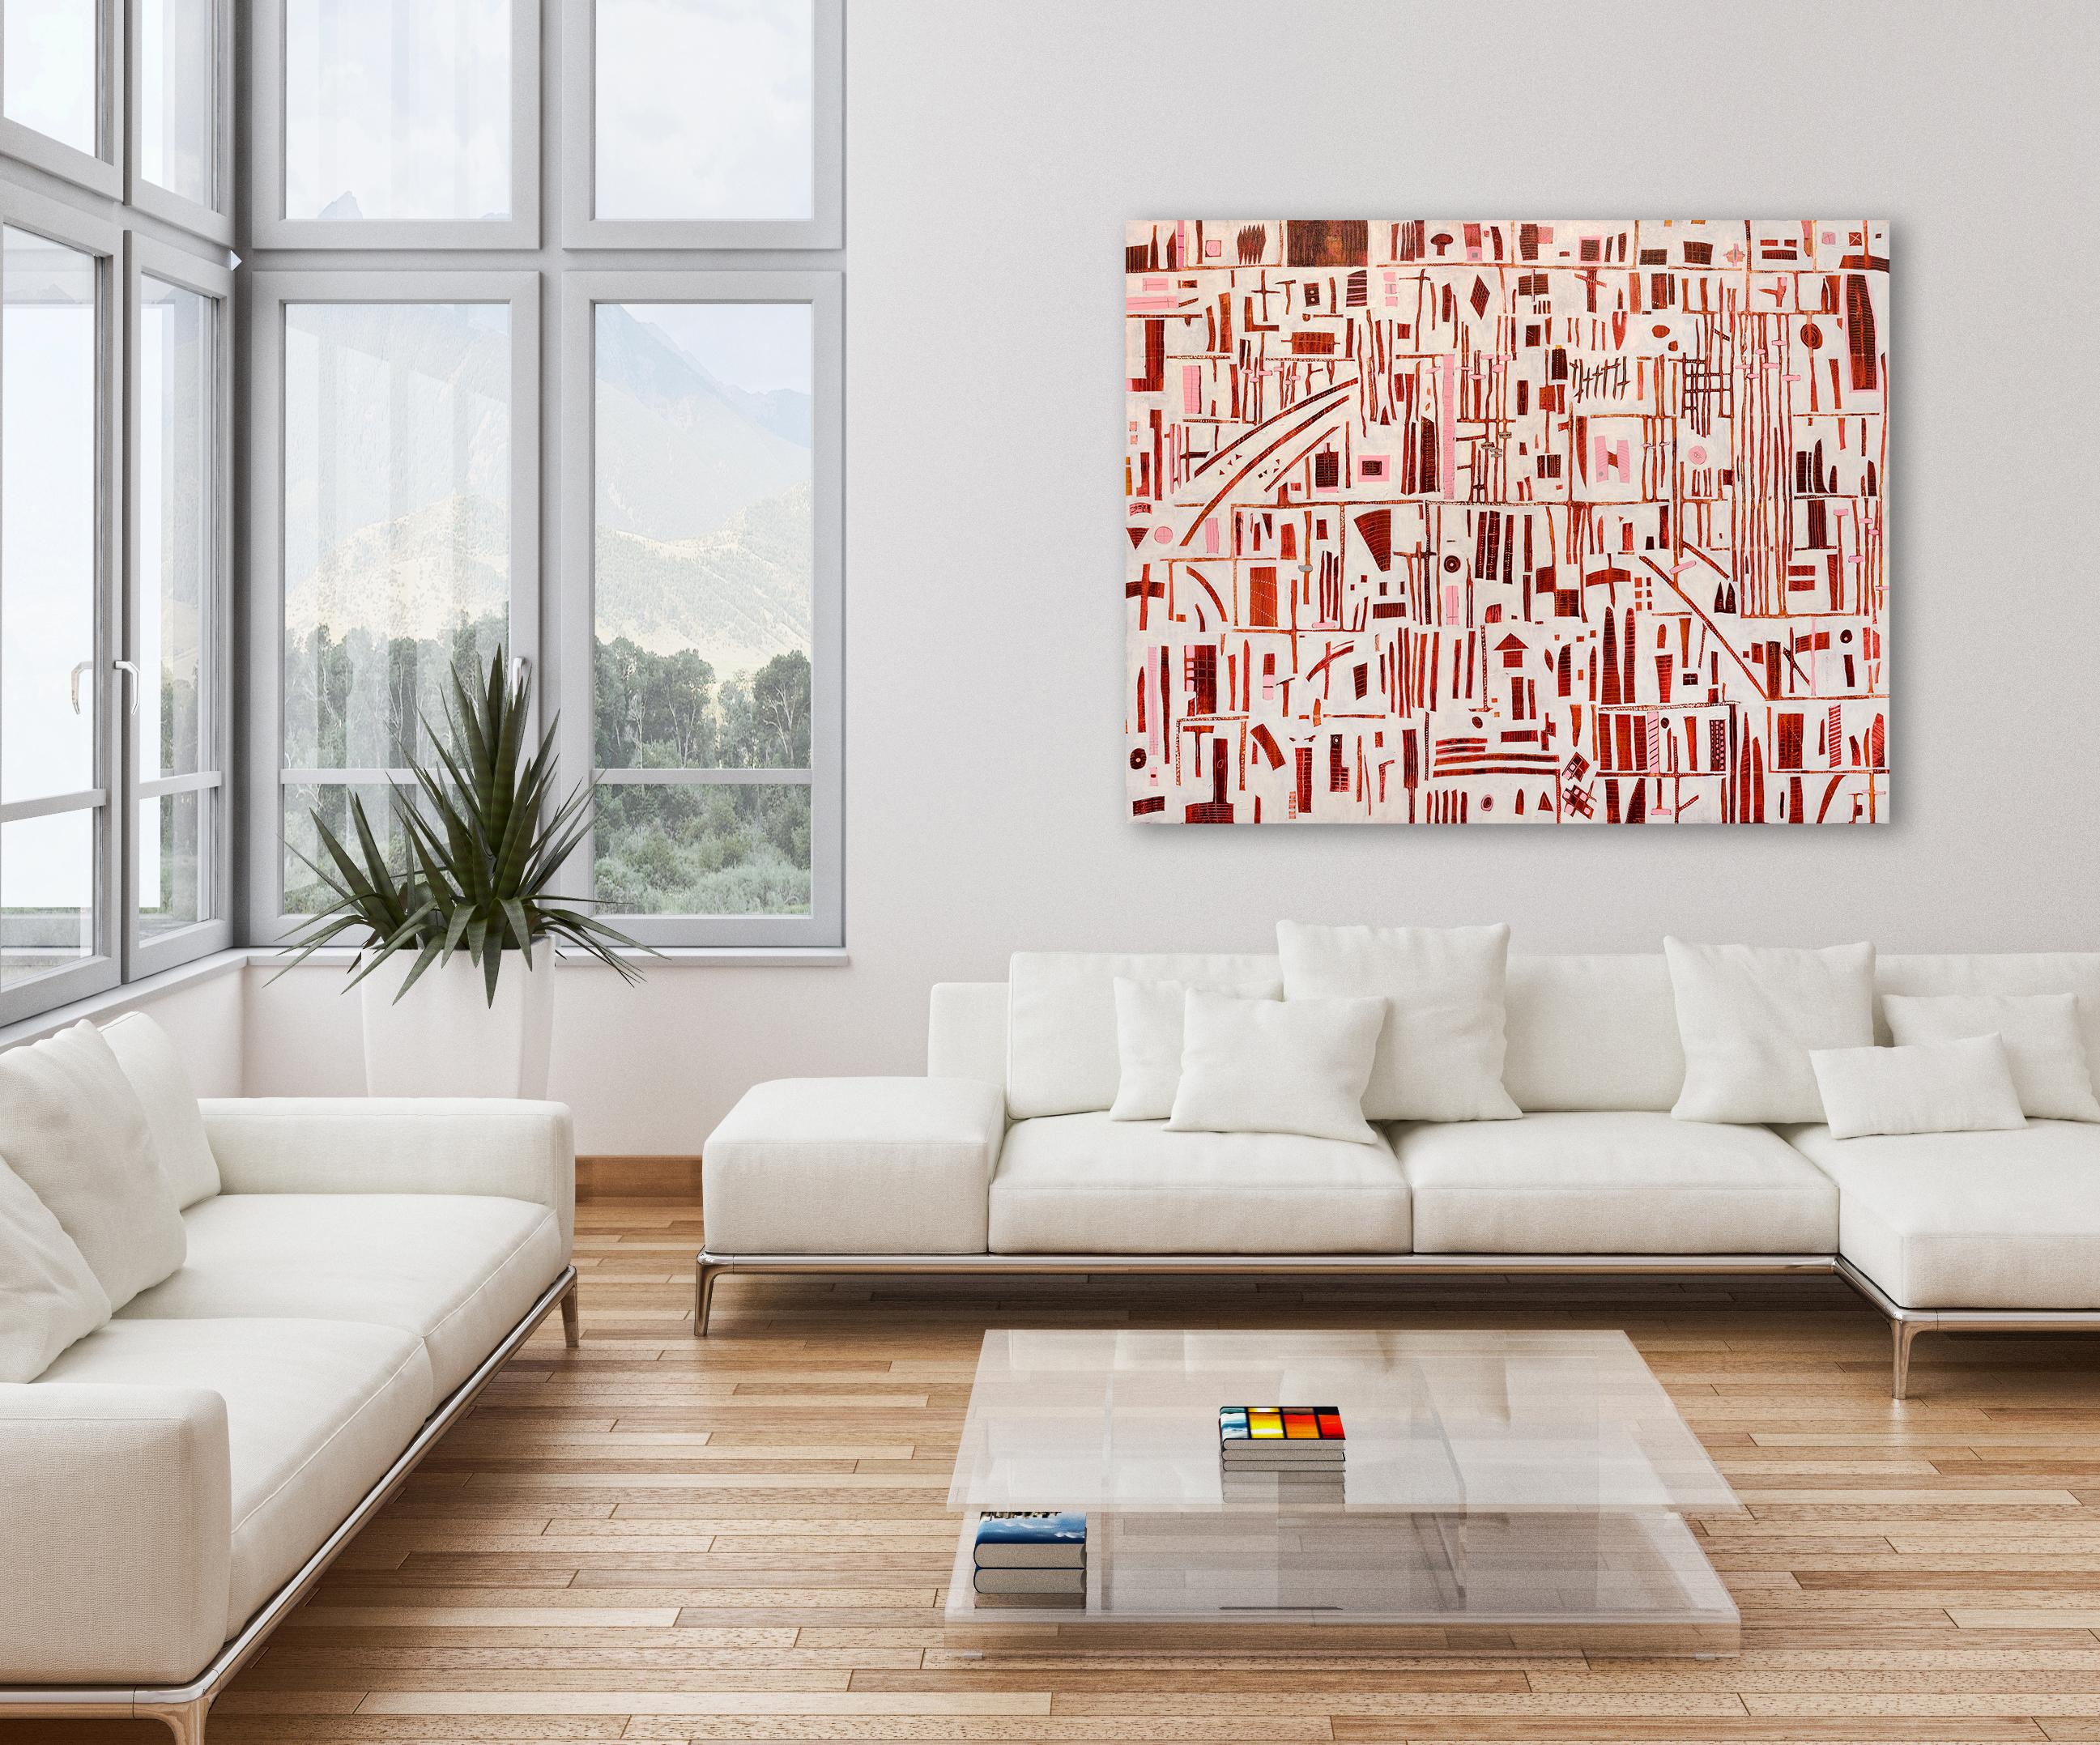 This large-scale abstract painting features a warm palette of deep red, muted orange, pink, and off-white. Made with acrylic paint on canvas, warm geometric and organic shapes criss cross and pattern the entire canvas over the off-white background